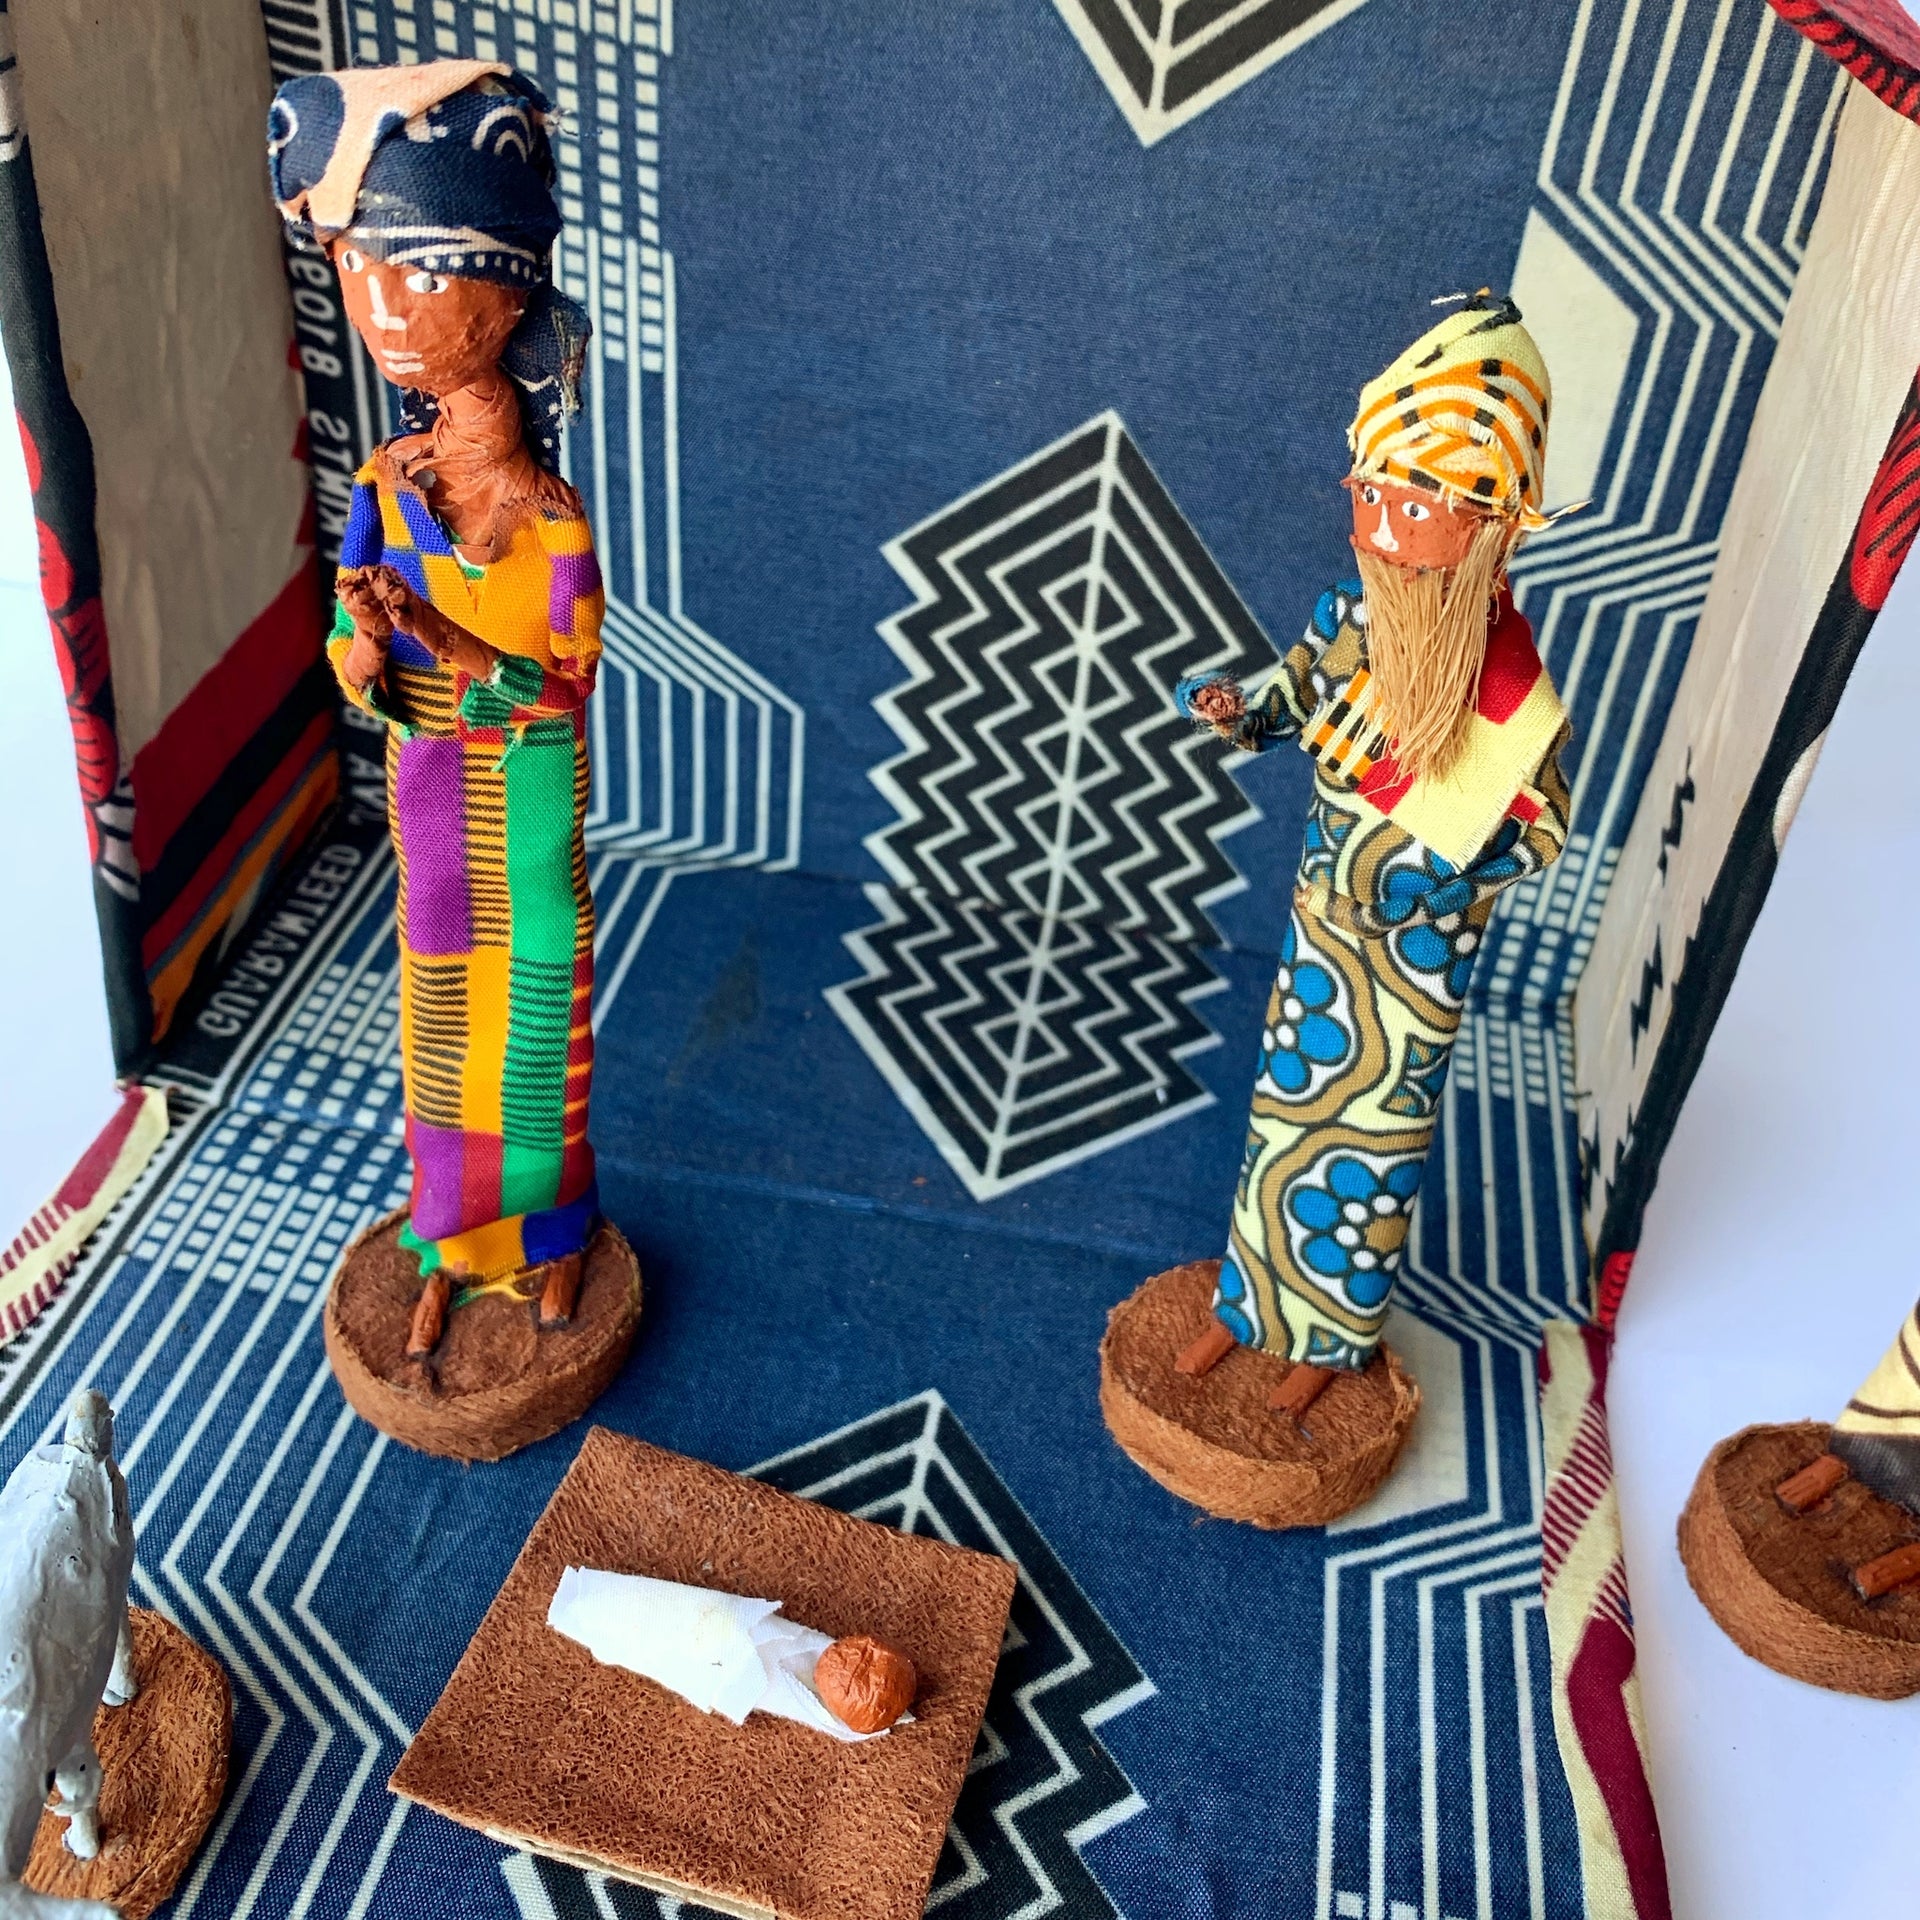 Handmade holy family figures in fair trade African nativity set.